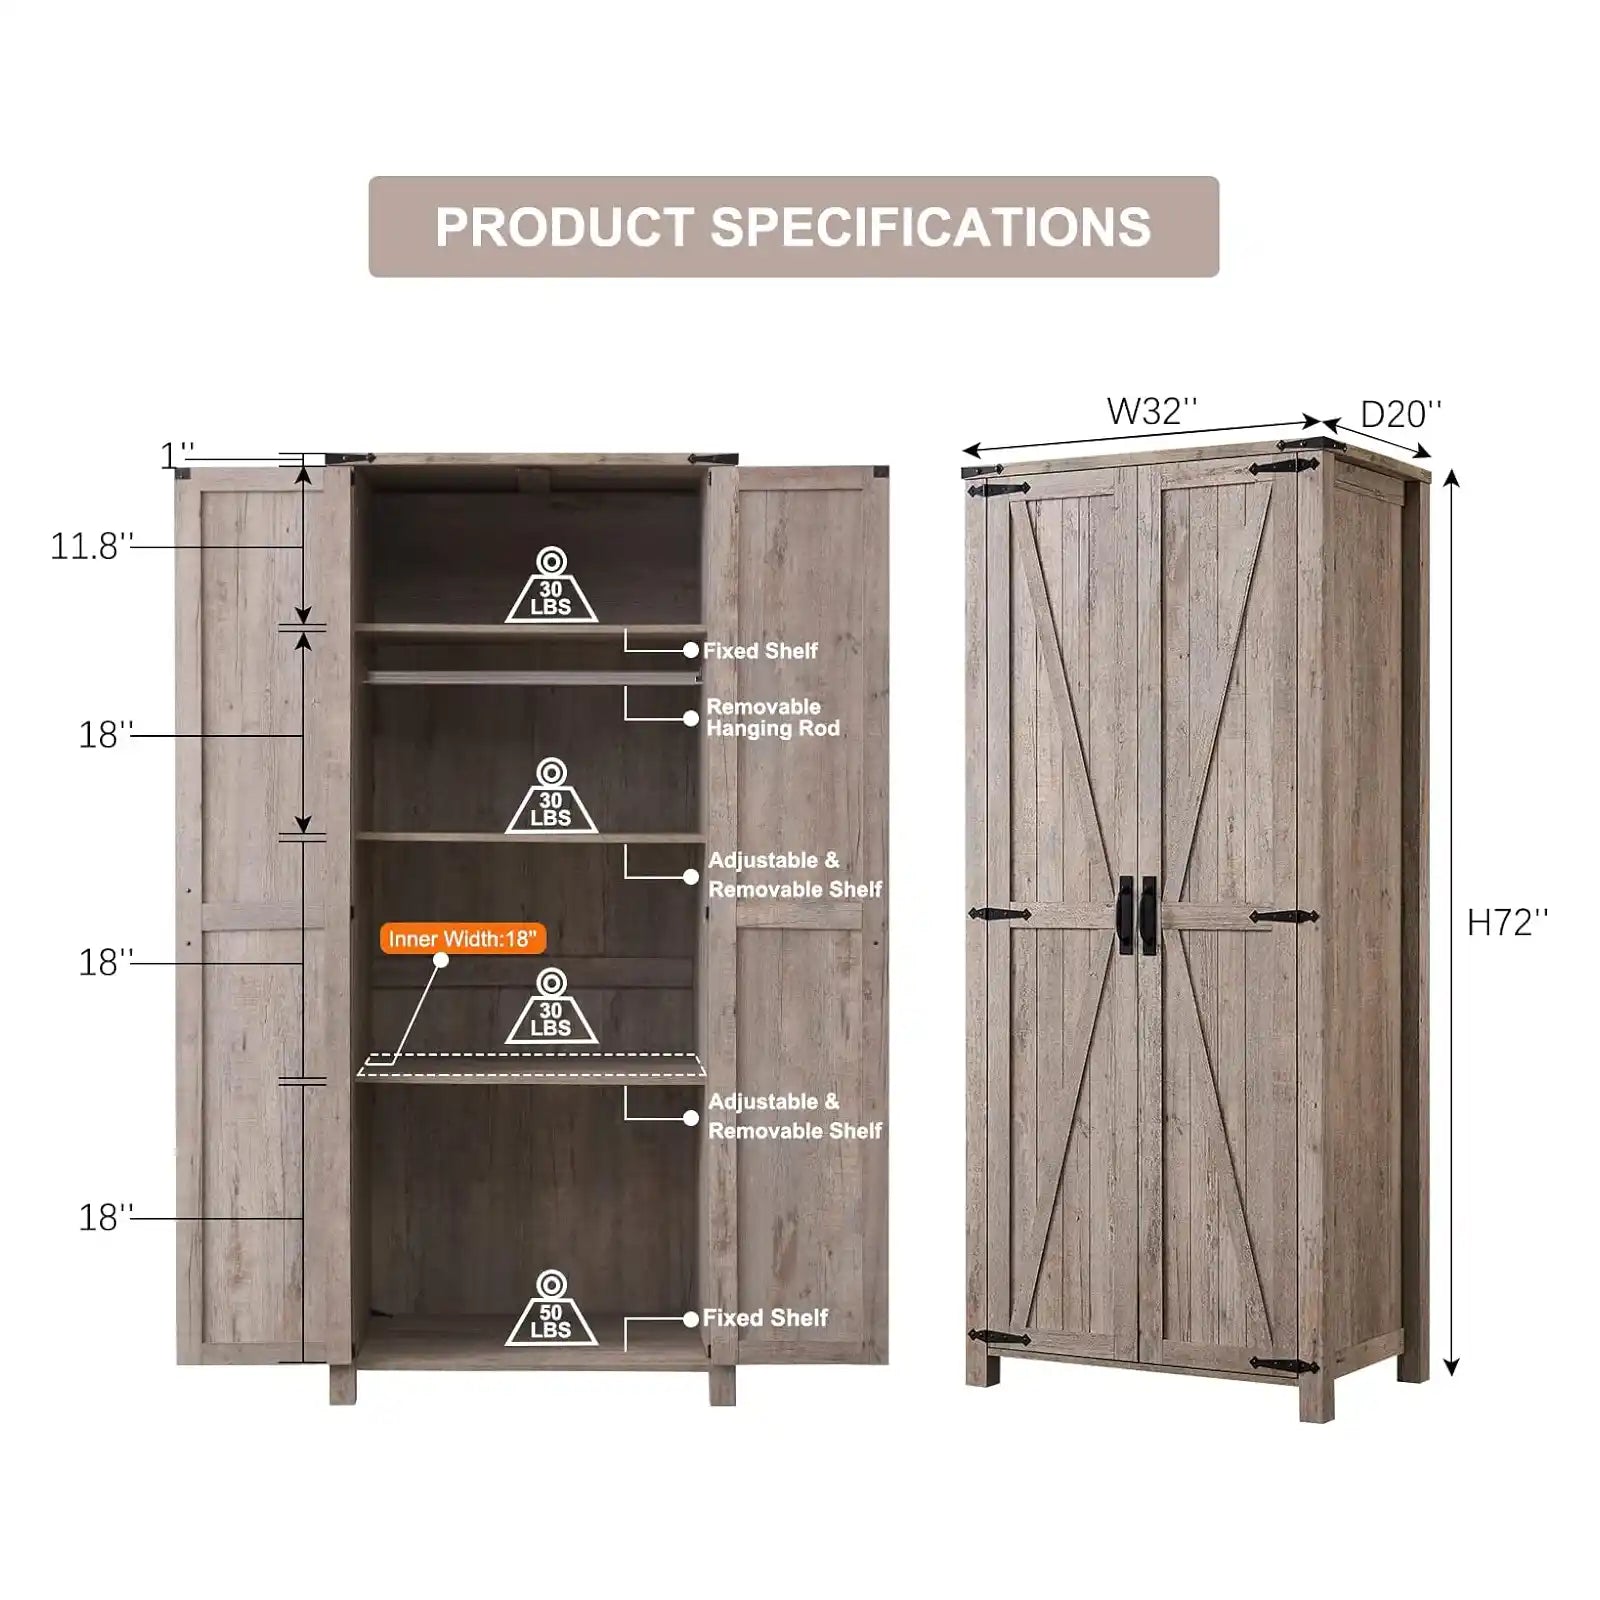 Storage Cabinet, Farmhouse Bathroom Organizer with Adjustable Shelves, Narrow Kitchen Pantry w/Barn Door, Versatile Storage w/Hanging Rod for Home, Laundry, Utility Room